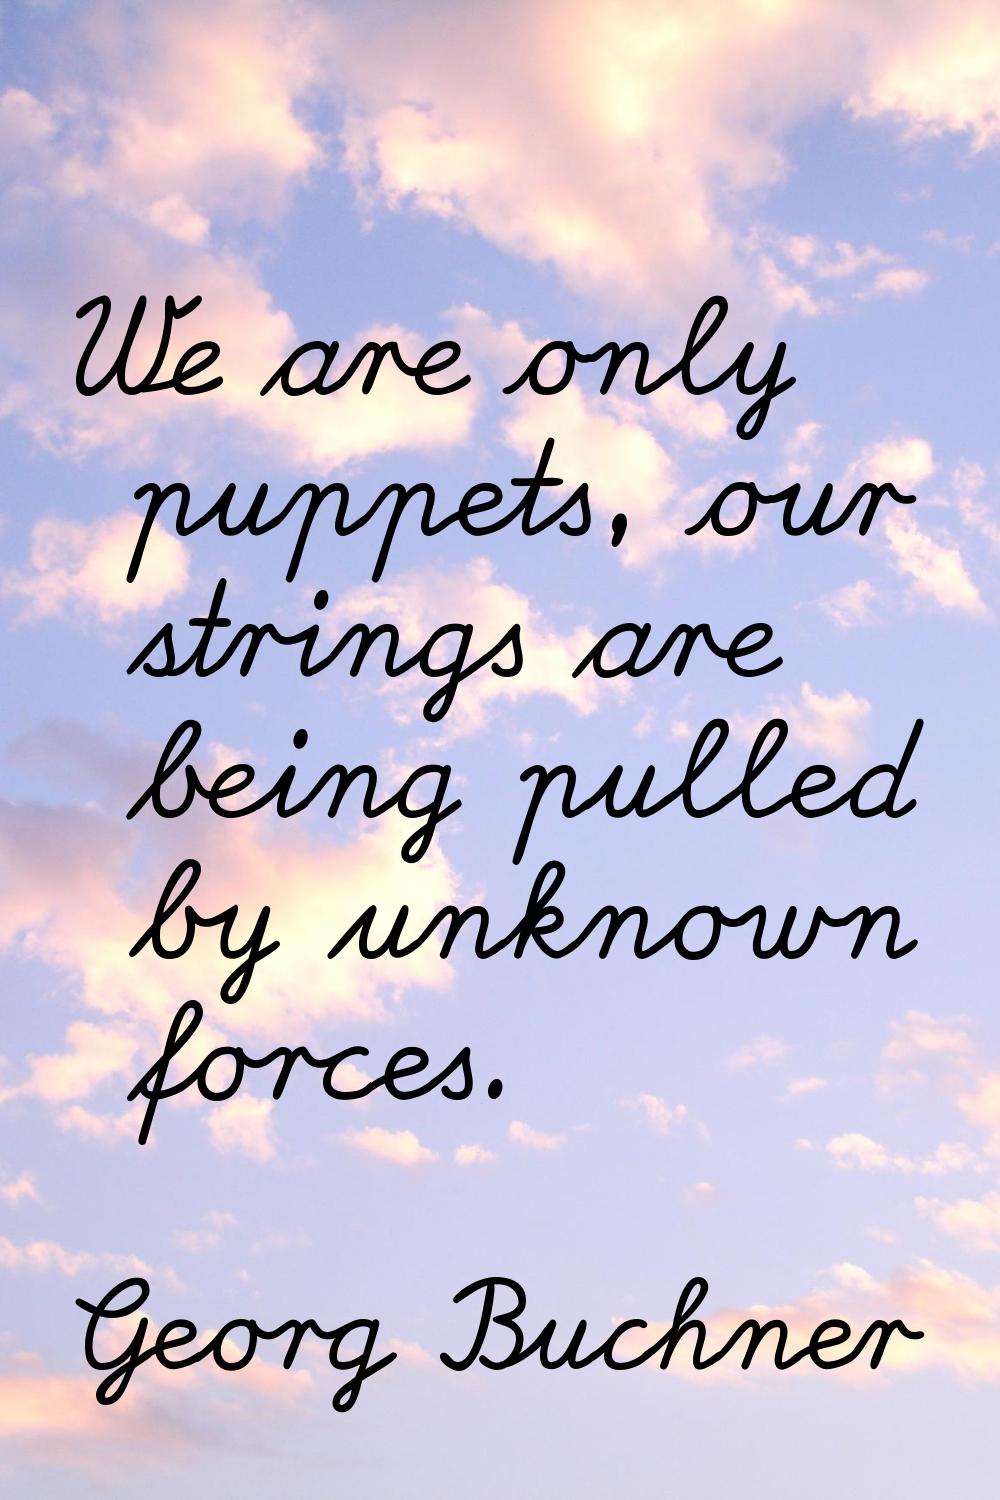 We are only puppets, our strings are being pulled by unknown forces.